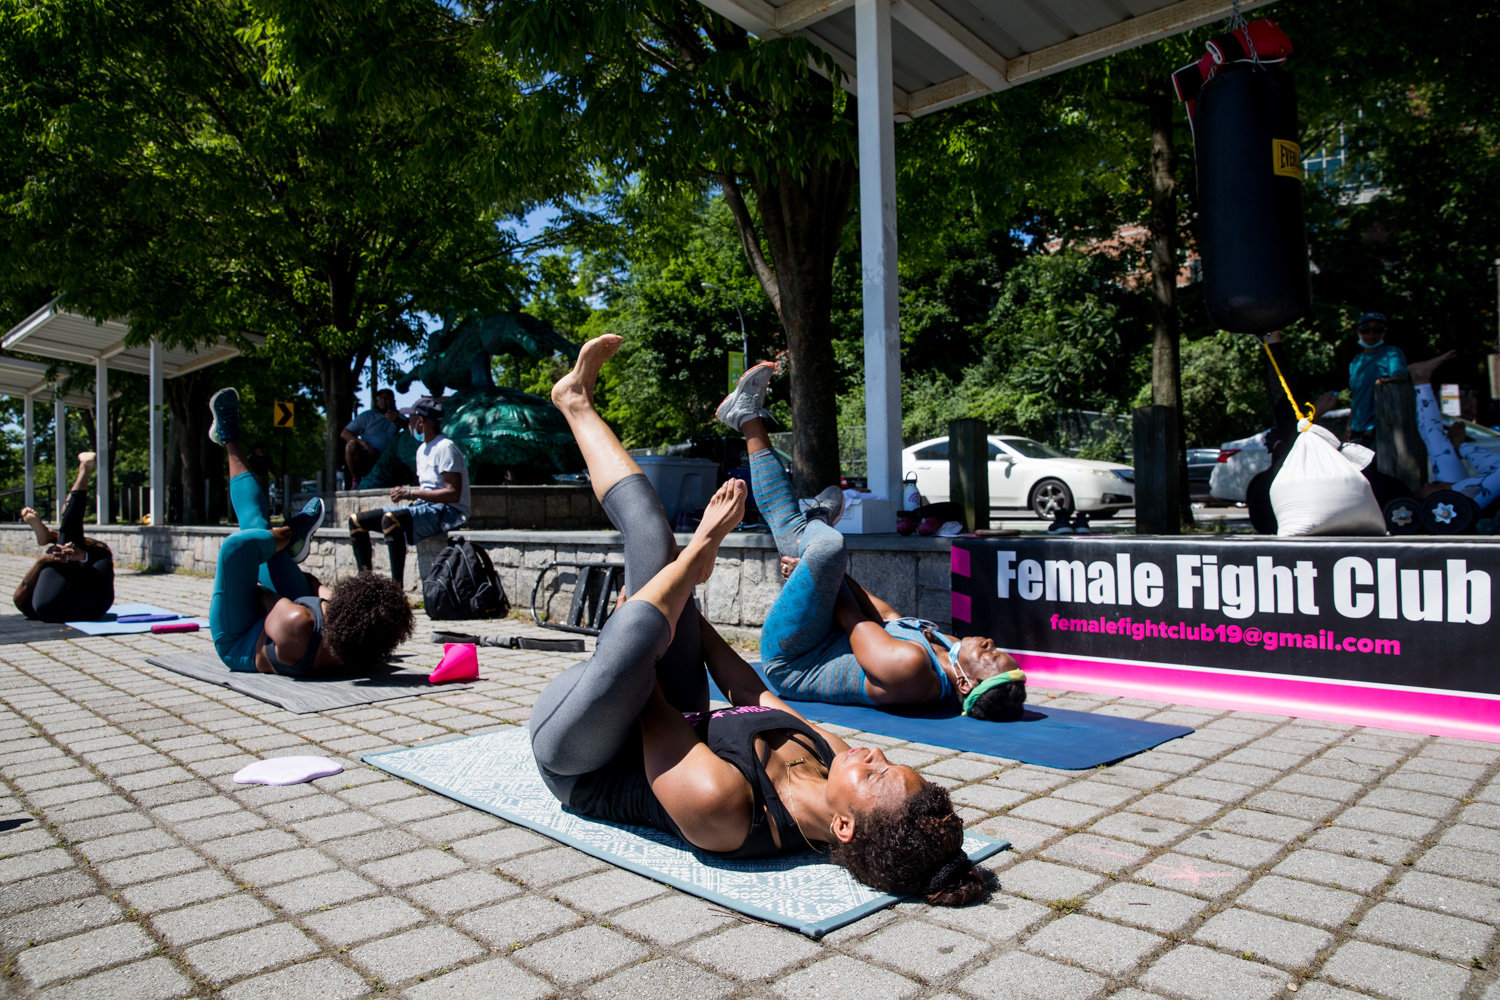 Members of Female Fight Club, a fitness group, cools down with yoga at the end of a workout routine in Van Cortlandt Park. Johanna Edmondson founded the club in the early days of the coronavirus pandemic.